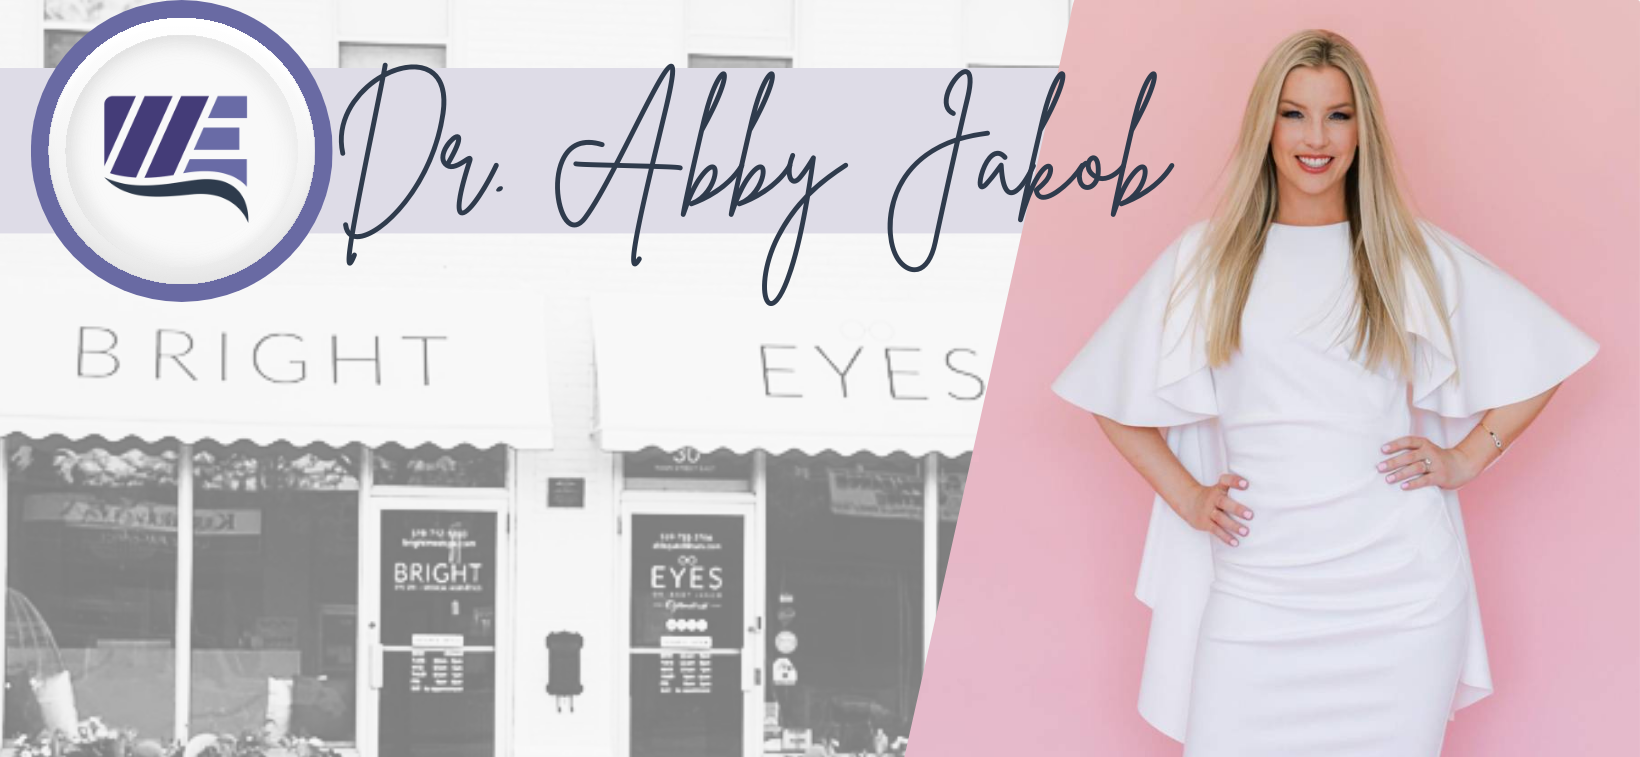 Dr. Abby Jakob, Optometrist and Owner of BRIGHT Eye Spa + Medical Aesthetics in Kingsville, Ontario